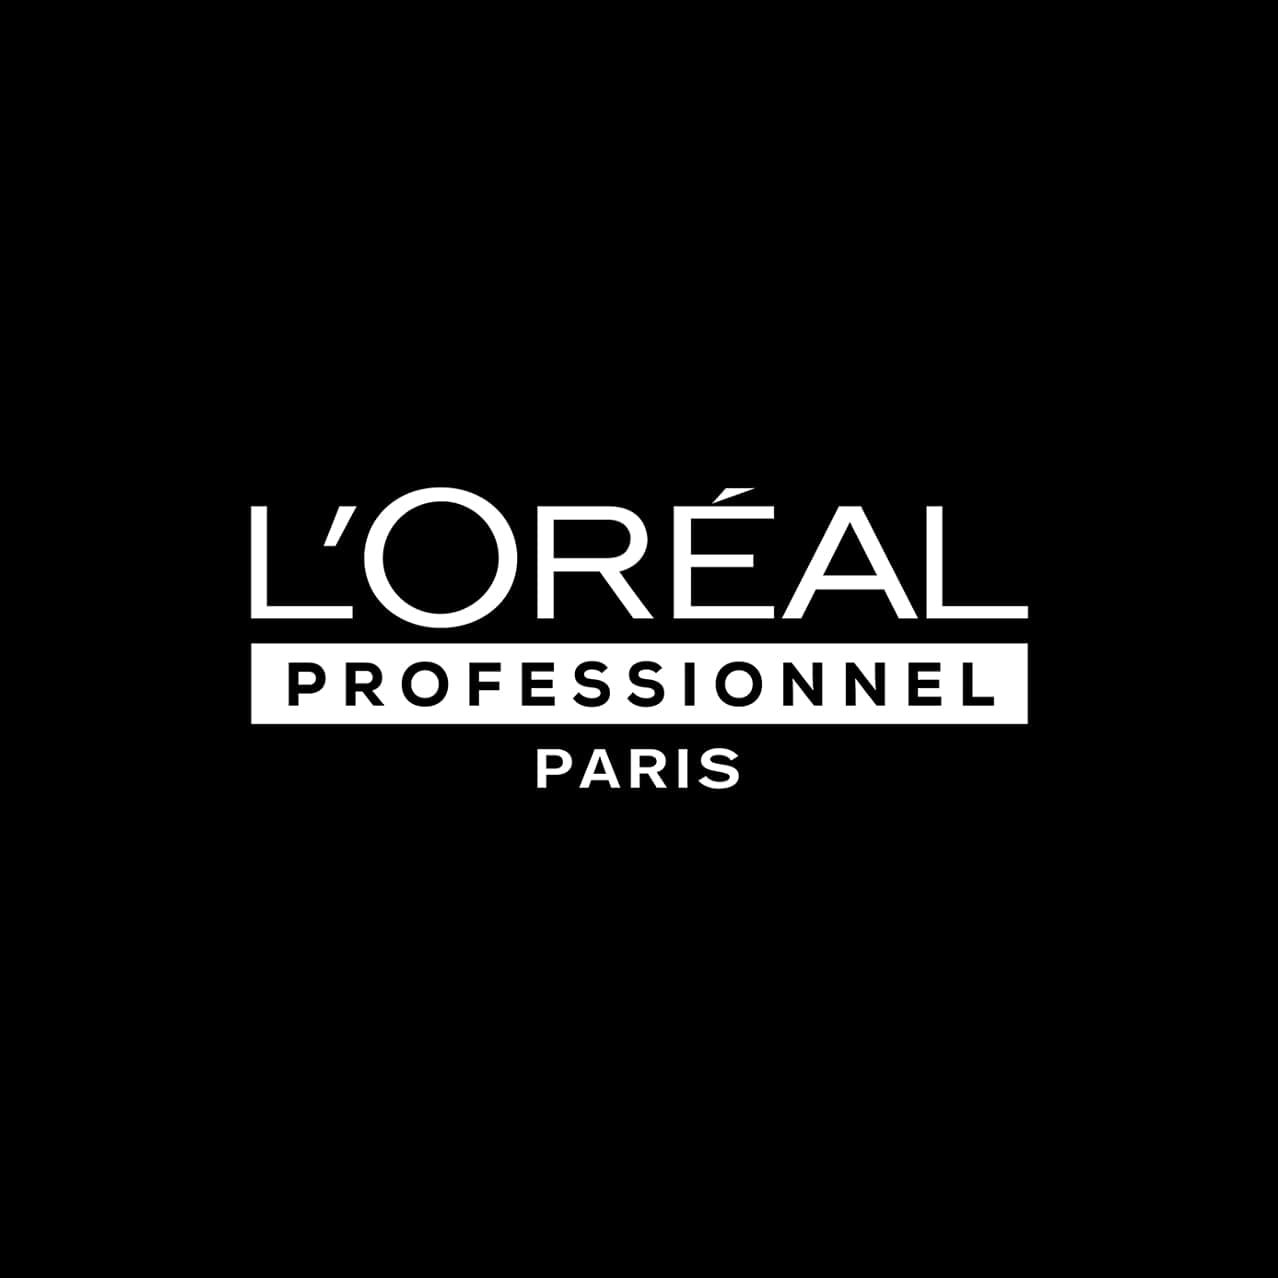 https://image.sistacafe.com/images/uploads/review/brand/brand_5637146928_lorealprofessional.jpg